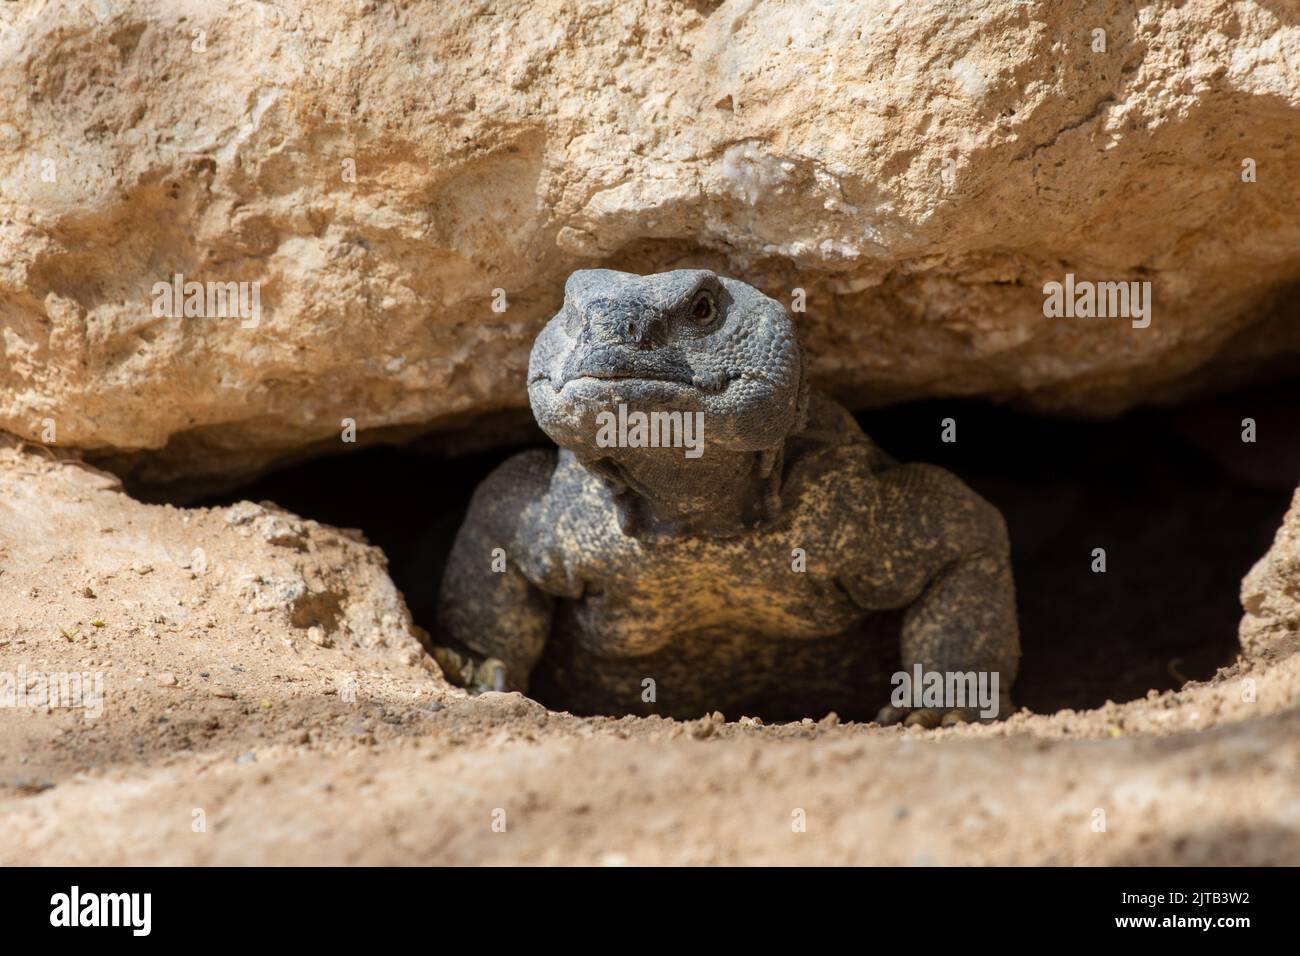 A green Leiptien's Spiny Tailed Lizard (Uromastyx aegyptia leptieni) close up peering out of the rocks. Stock Photo